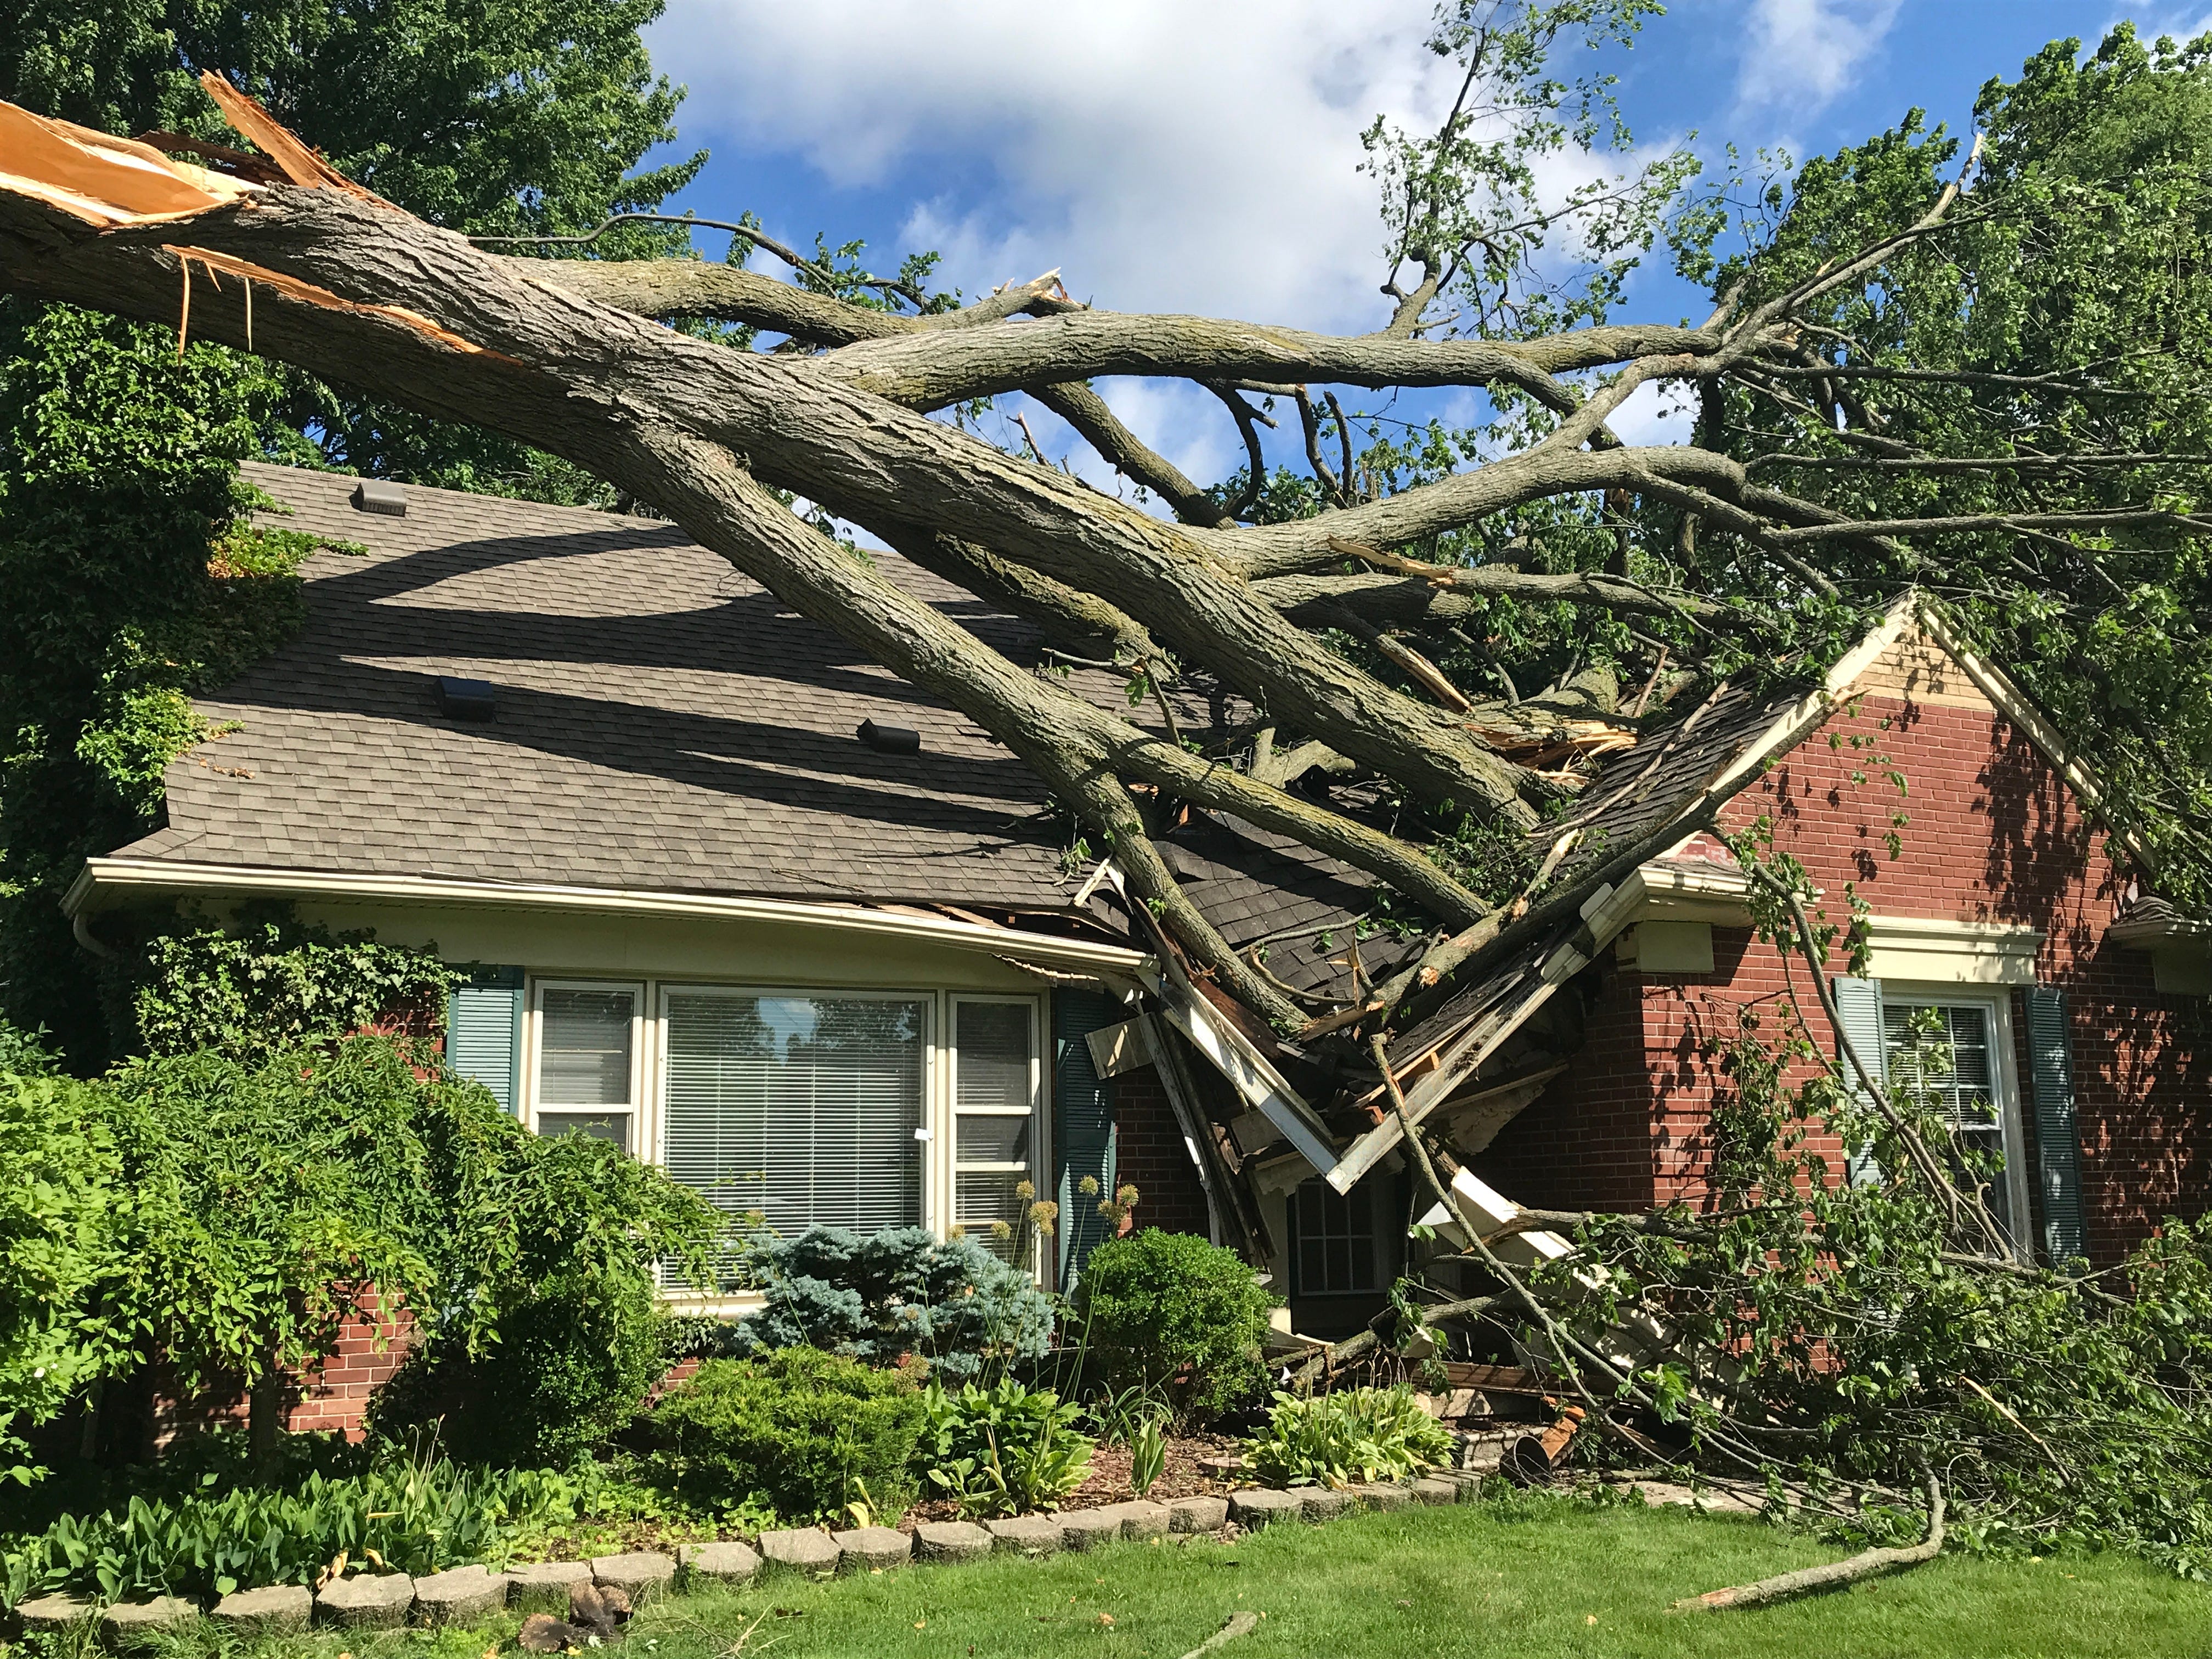 High winds caused a neighbor's tree to fall on Rebecca and Paul Tomezak's home in Grosse Pointe Woods causing significant damage to the roof.